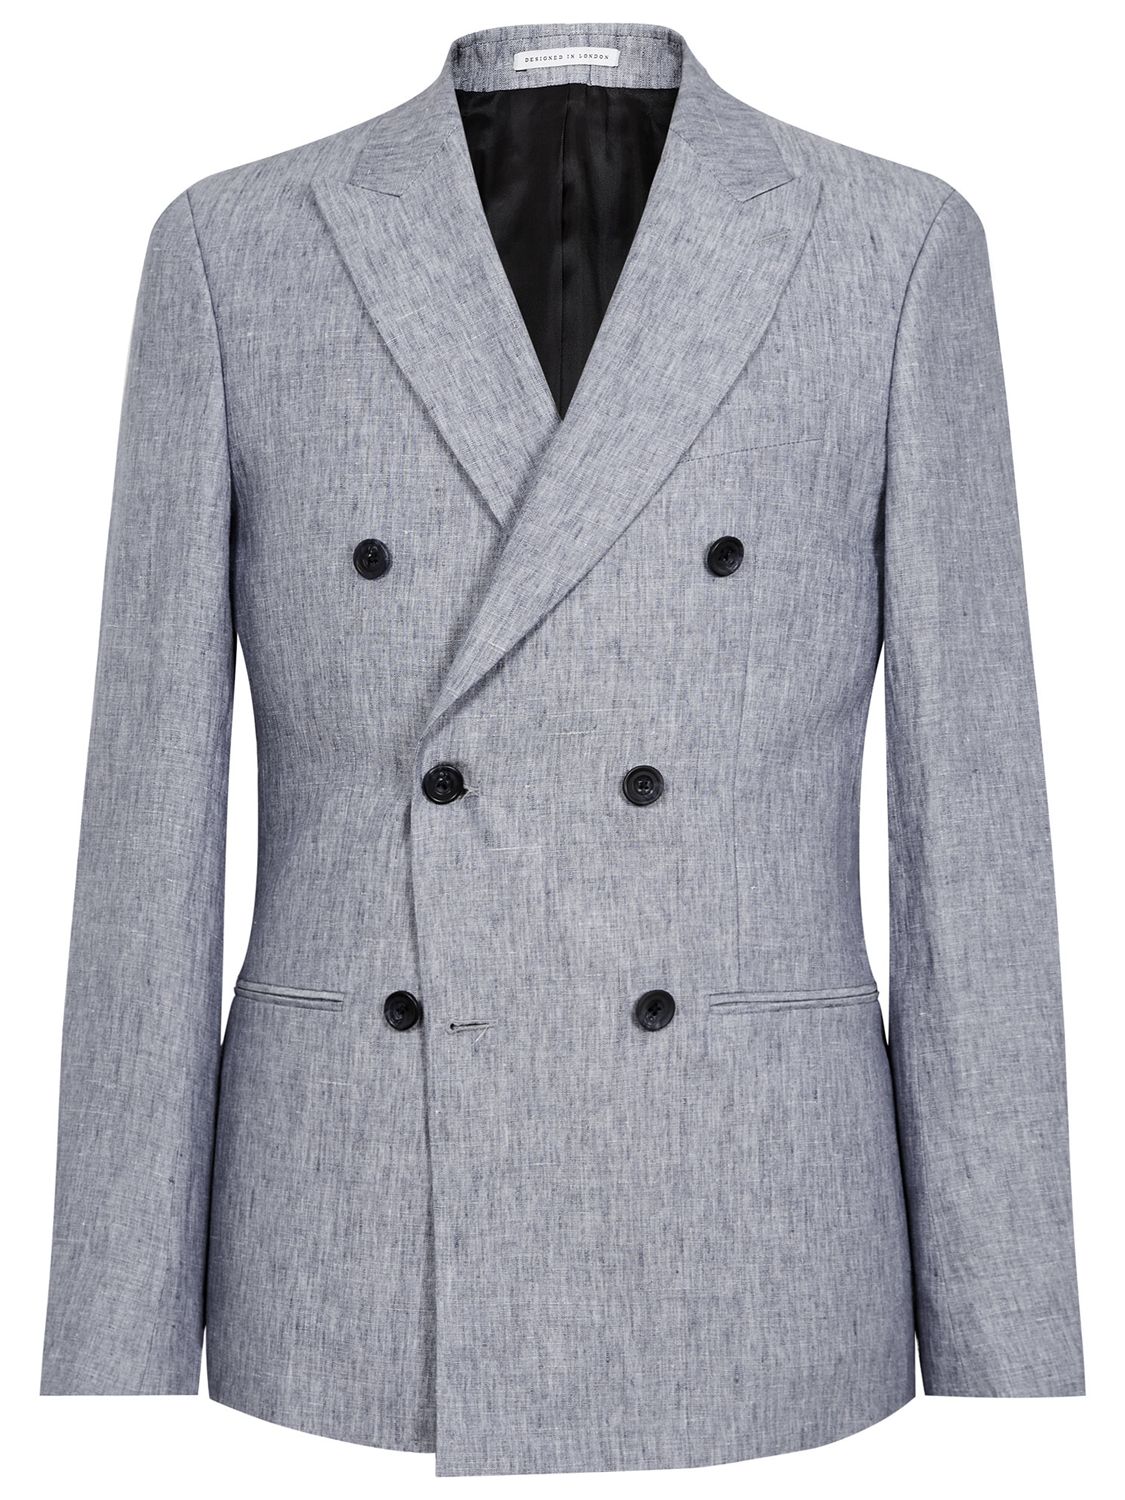 Reiss Miami Double Breasted Slim Fit Linen Suit Jacket, Soft Blue